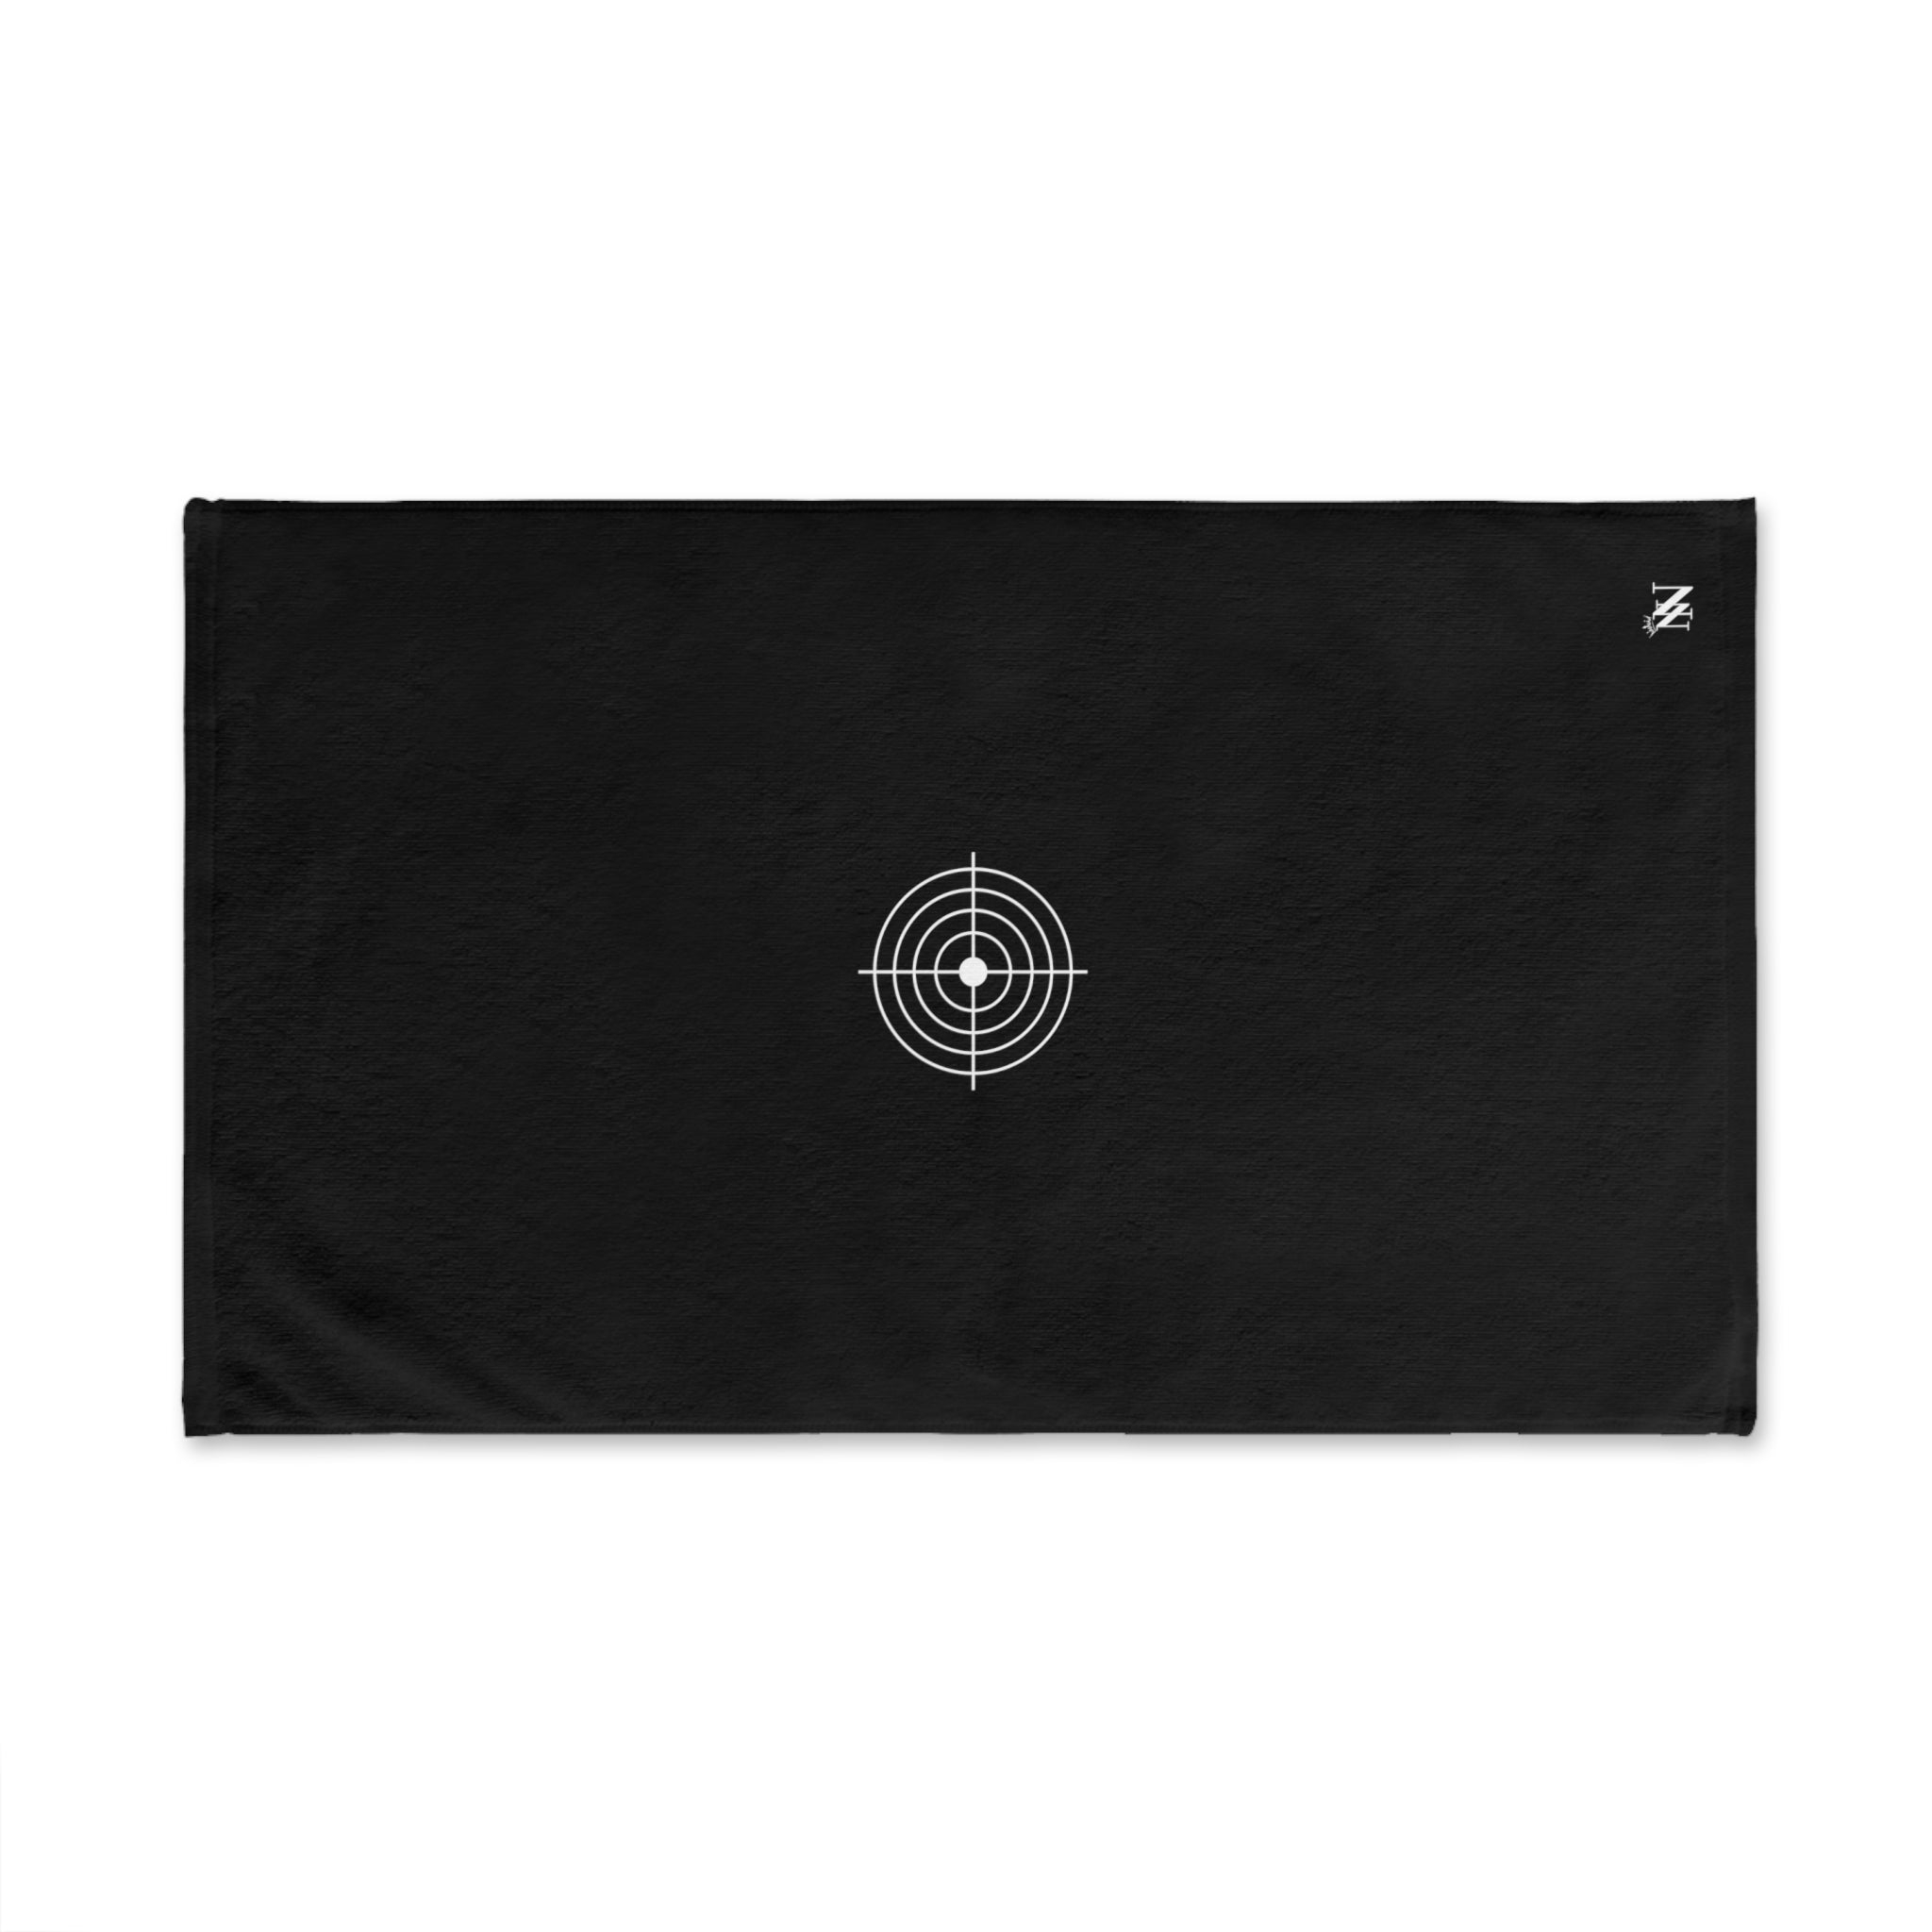 Small White Crosshairs Black | Sexy Gifts for Boyfriend, Funny Towel Romantic Gift for Wedding Couple Fiance First Year 2nd Anniversary Valentines, Party Gag Gifts, Joke Humor Cloth for Husband Men BF NECTAR NAPKINS